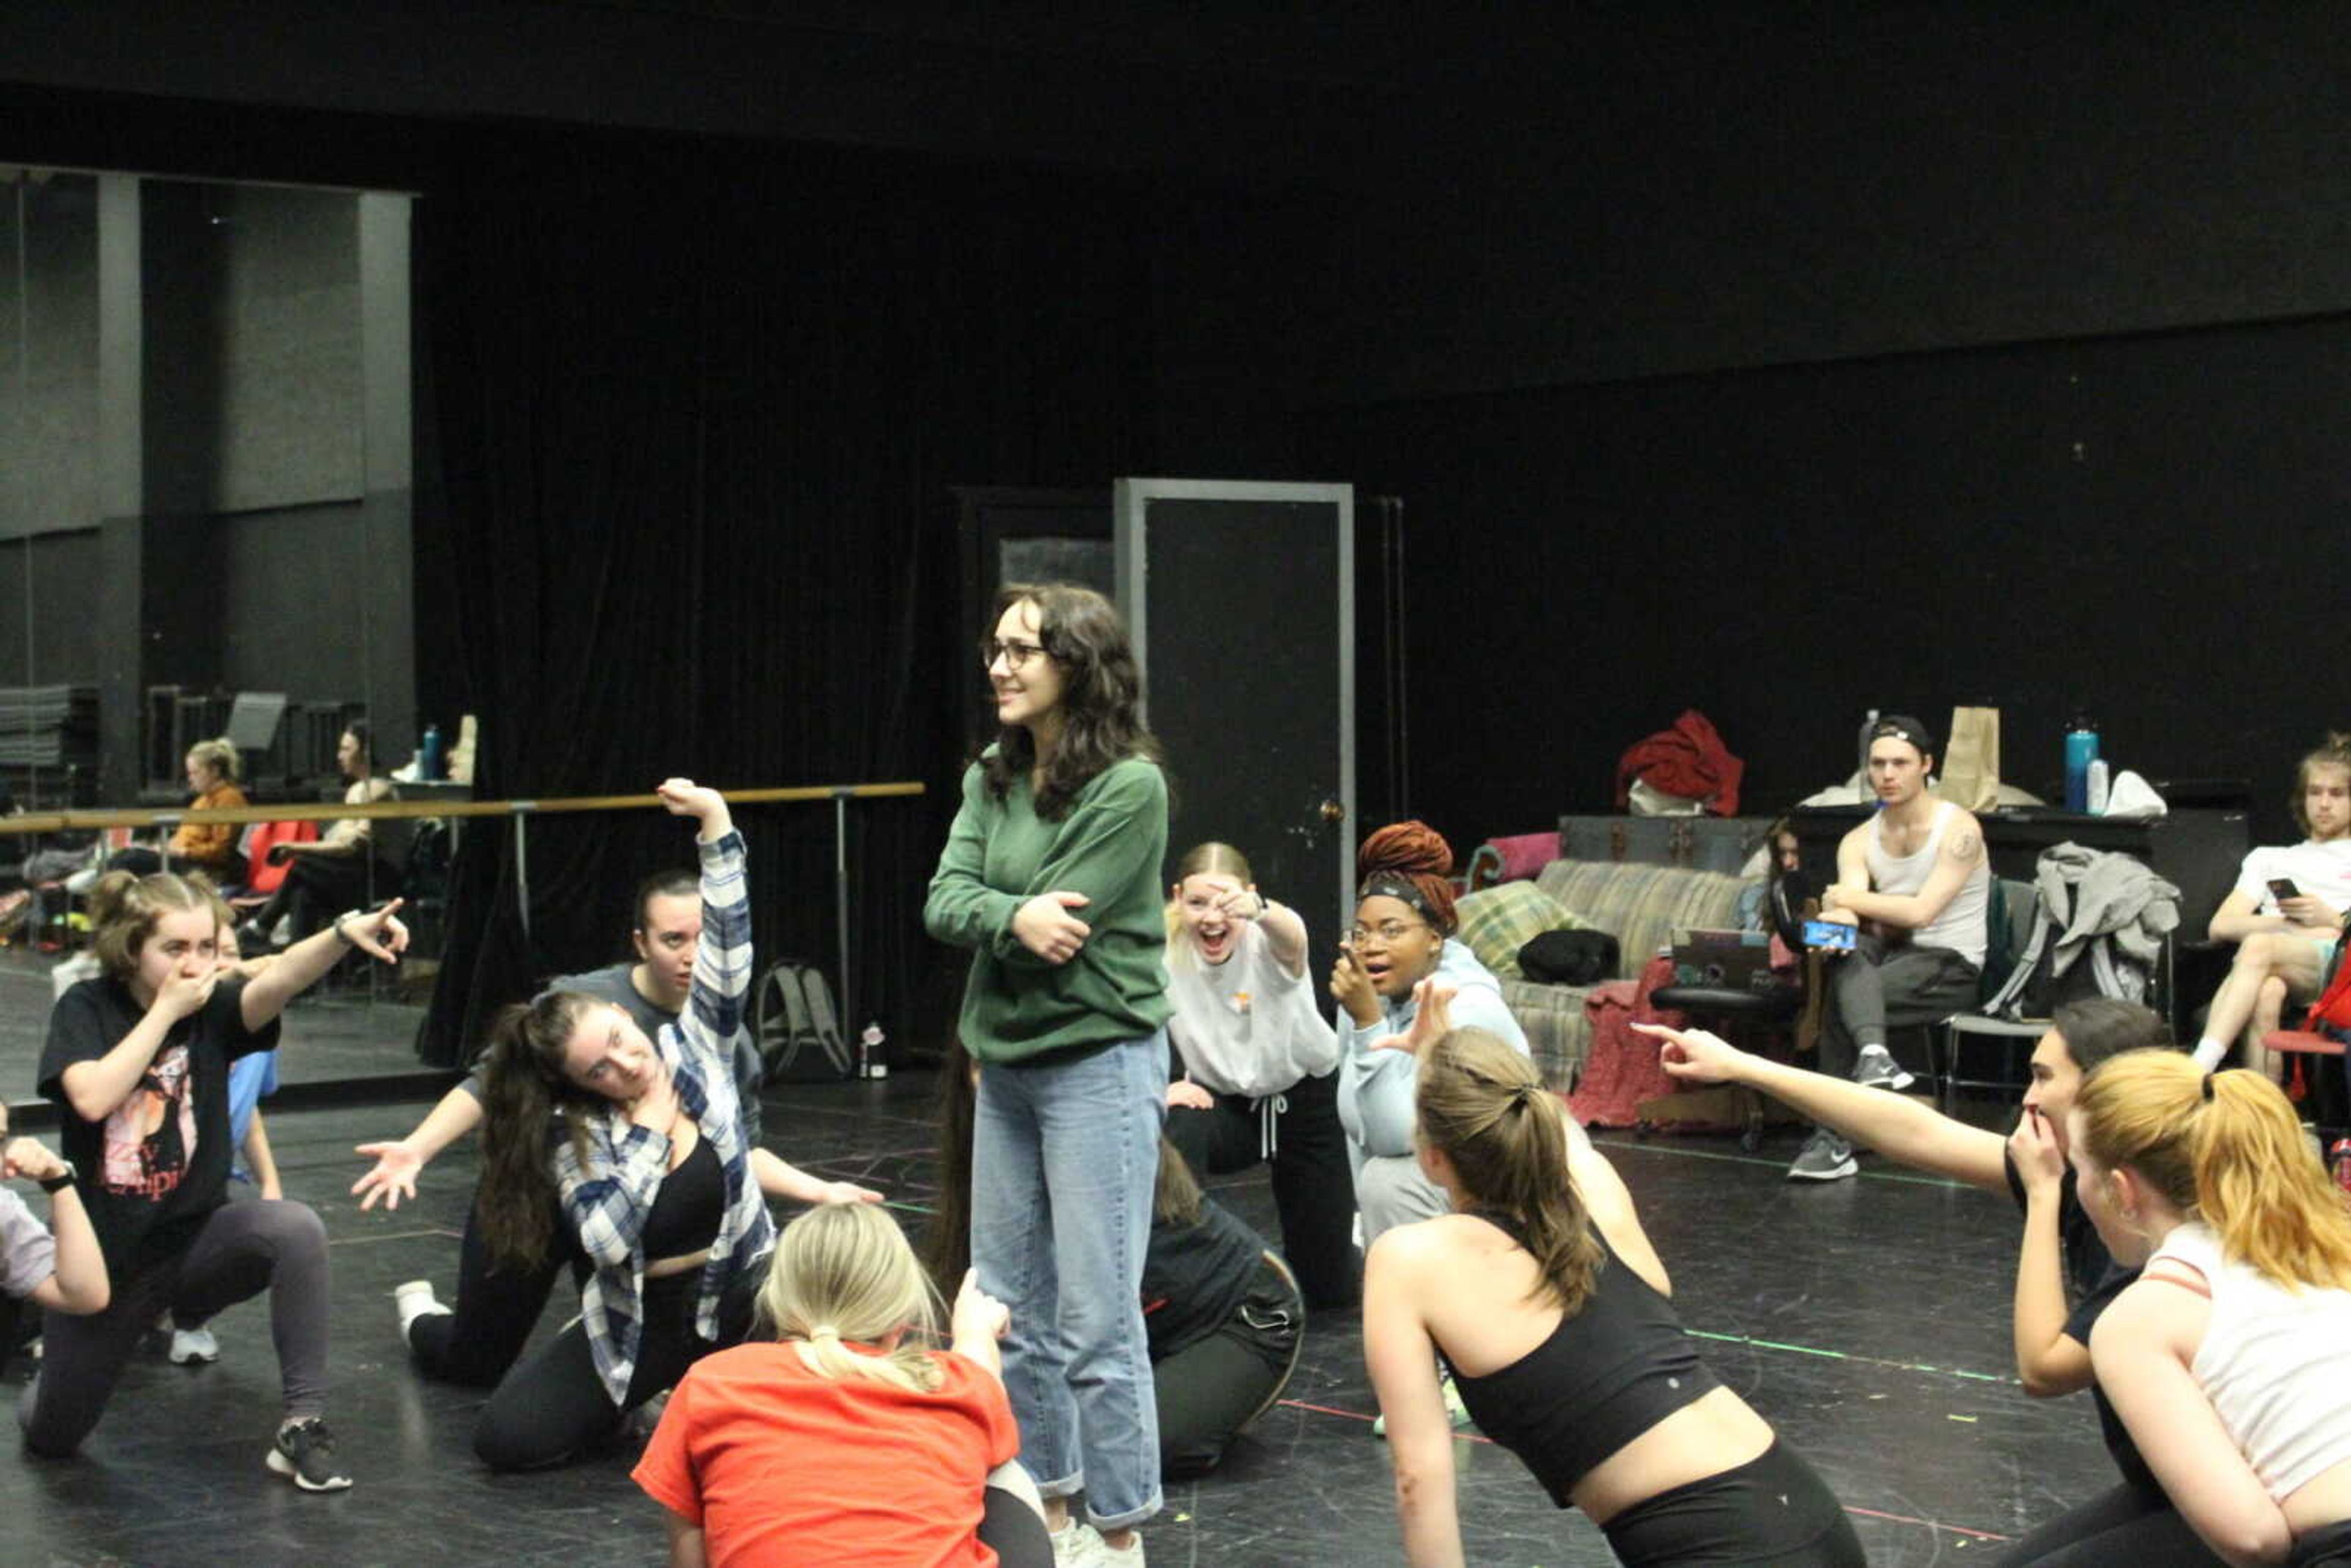 Sophomore musical theater major Caroline Nitardy surrounded by Carrie cast members during a rehearsal. Nitardy has been preparing for the role by reading the Stephen King novel the musical was based off of and exploring the complex emotions behind the character.